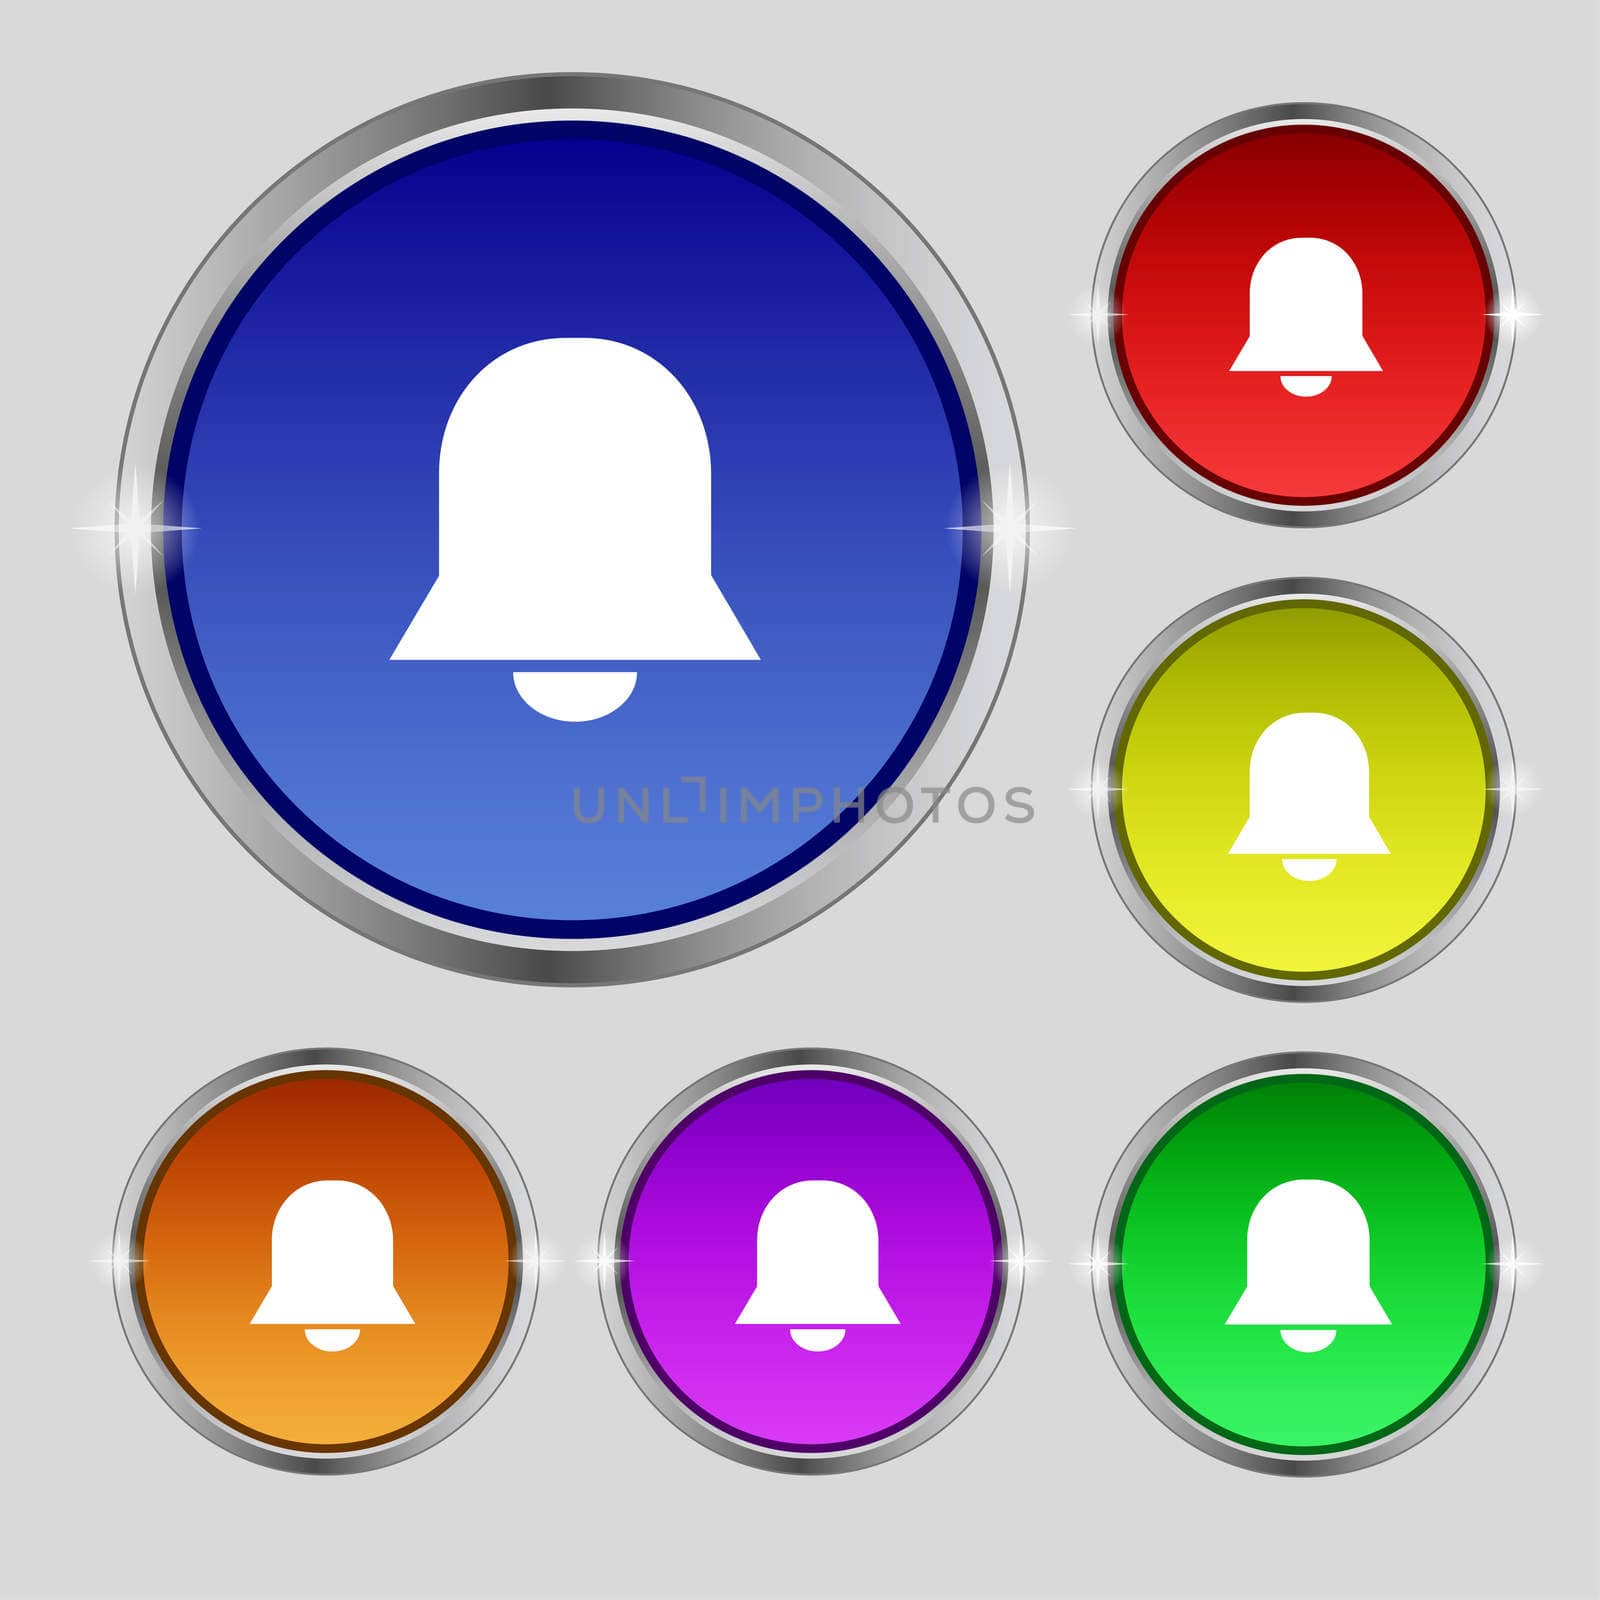 Alarm bell icon sign. Round symbol on bright colourful buttons. illustration